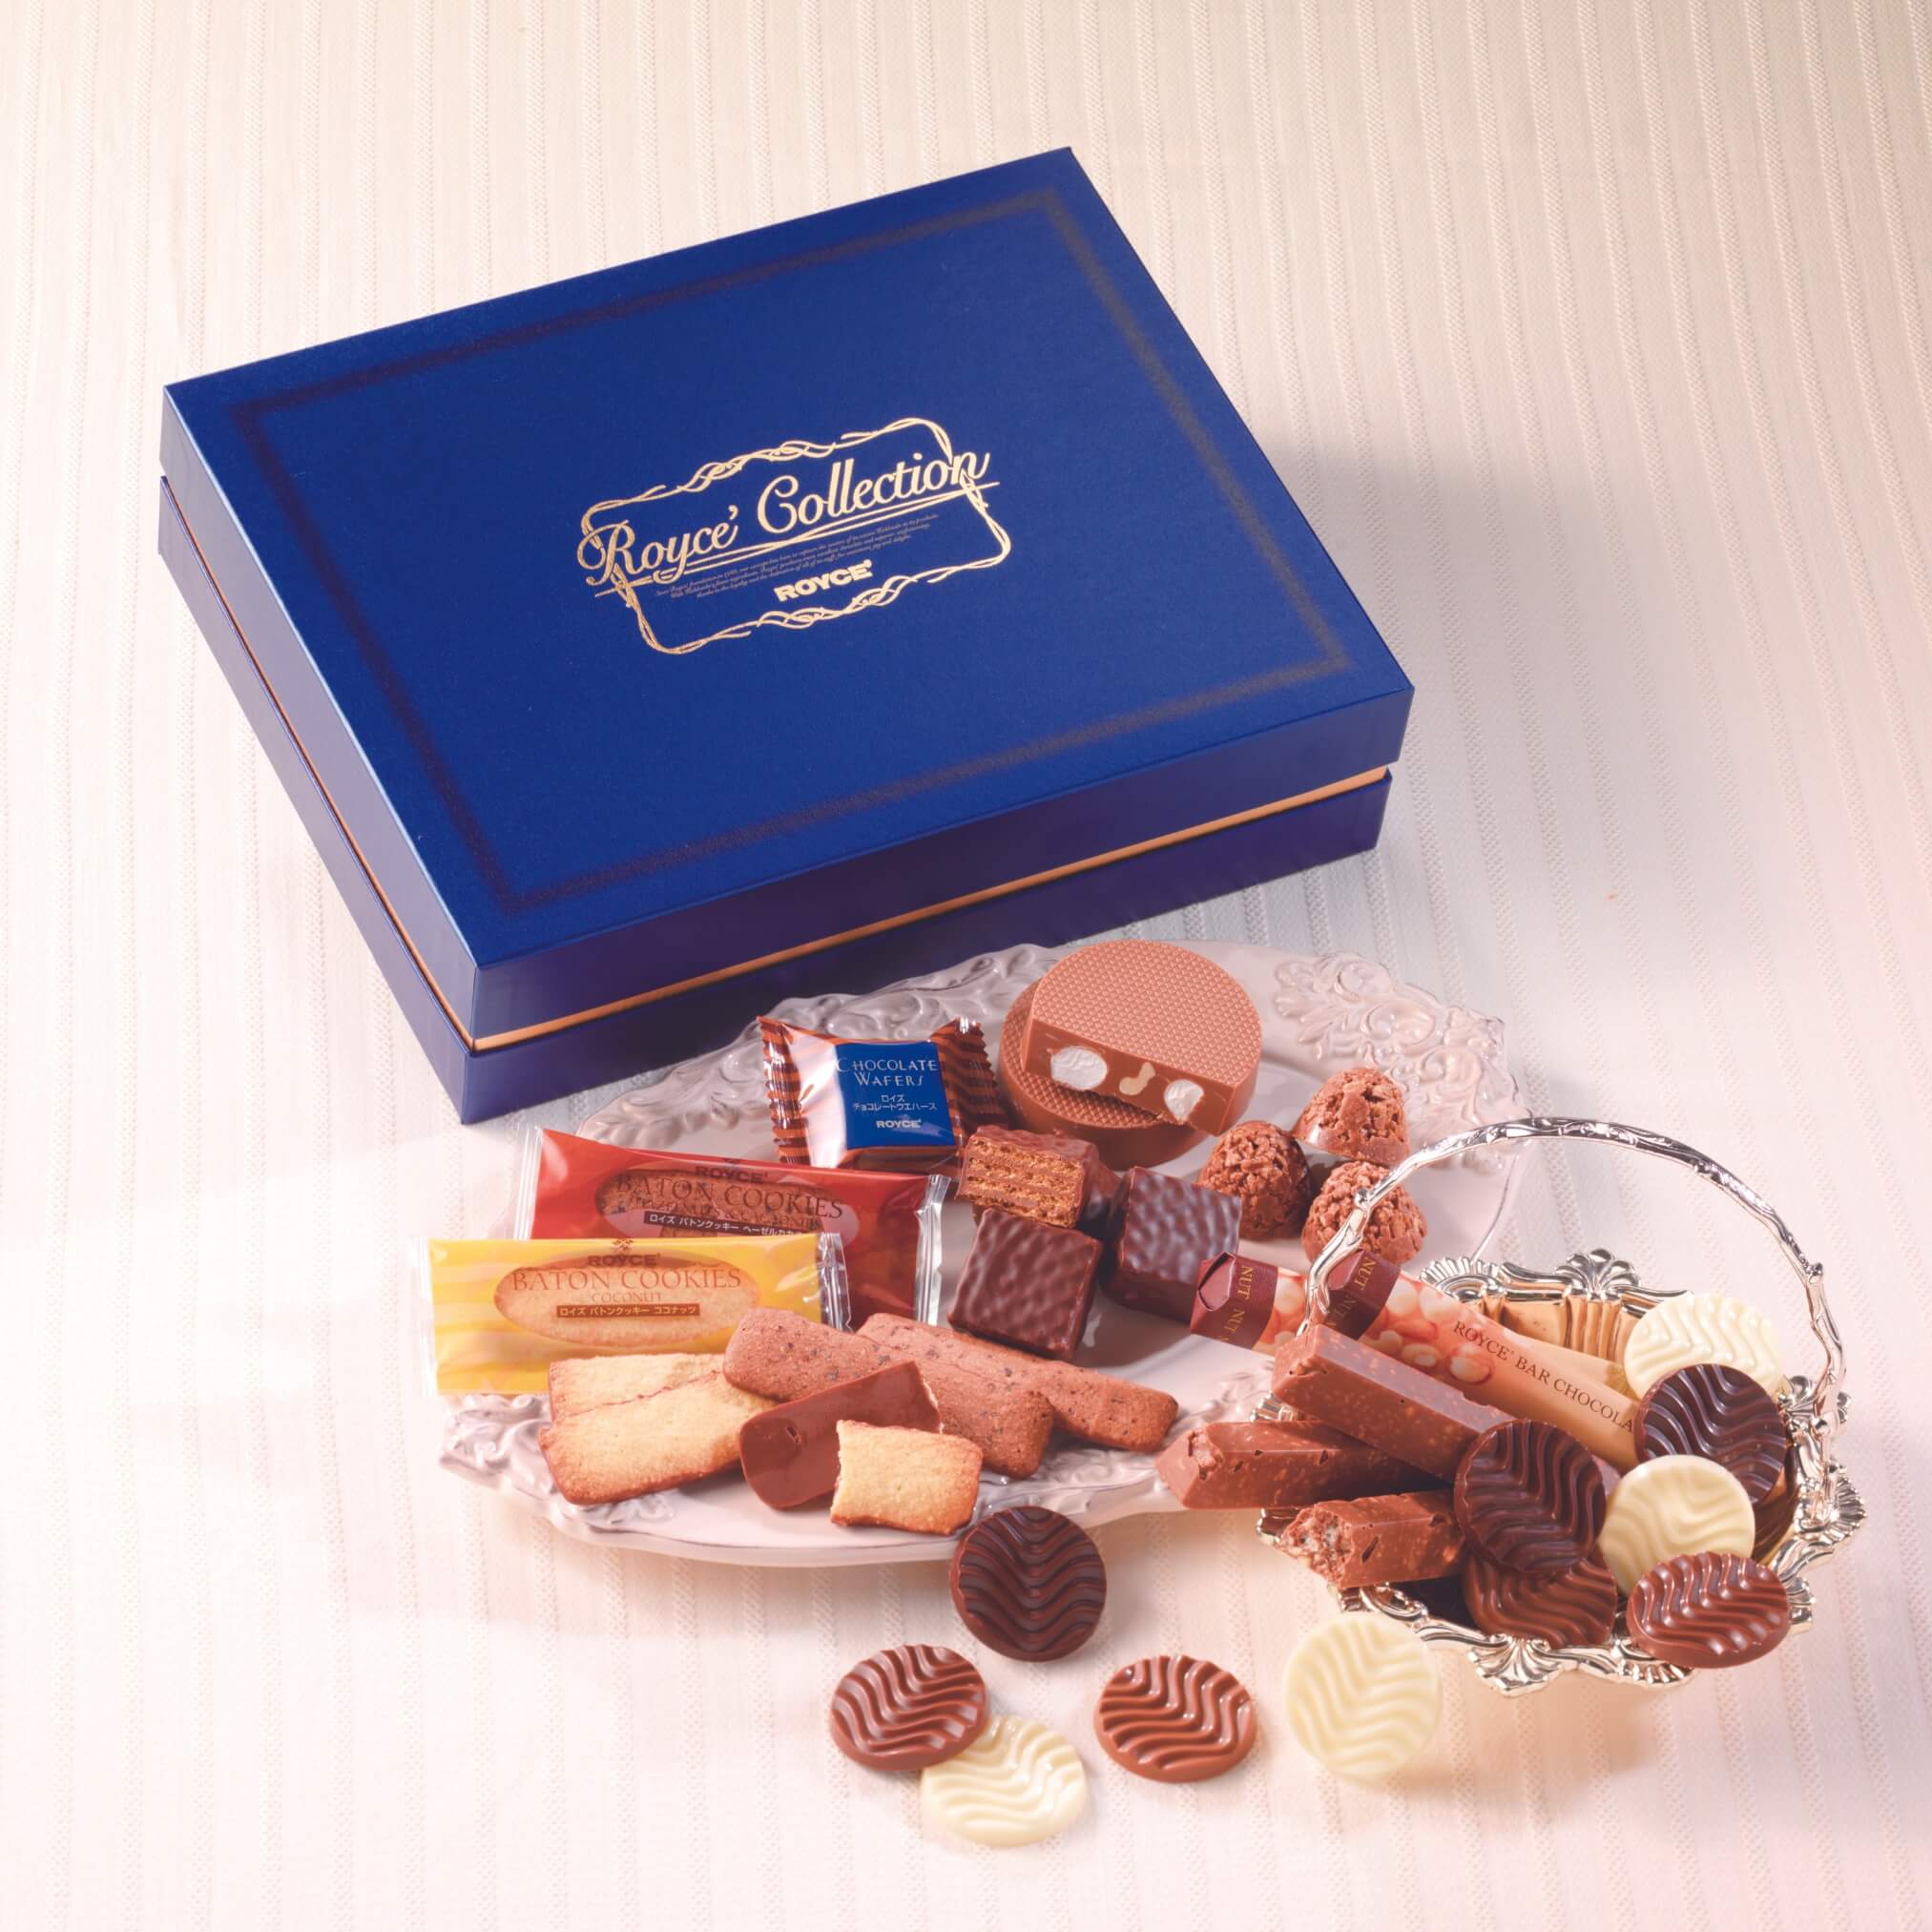 ROYCE' Chocolate - ROYCE' Collection "Blue" - Image shows on top left a blue box. Gold text says ROYCE' Collection ROYCE'. Below the box are a mix of confections in various shapes and colors, as arranged in accents such as a glass plate and silver bowl. Background and surface is a white tablecloth.